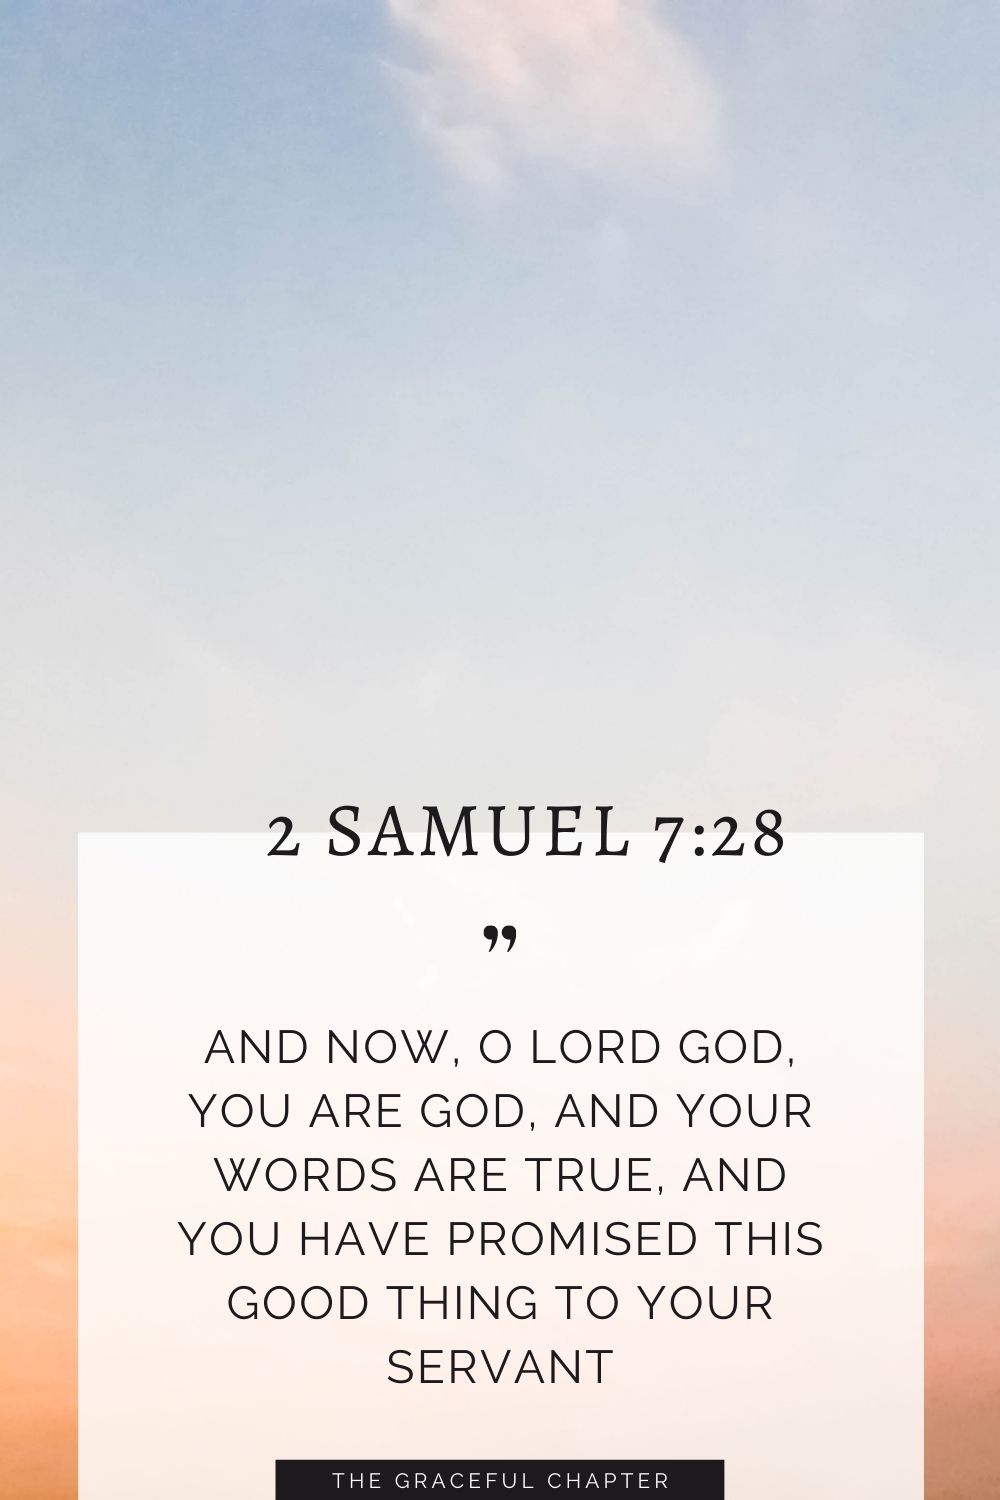 And now, O Lord God, you are God, and your words are true, and you have promised this good thing to your servant 2 Samuel 7:28